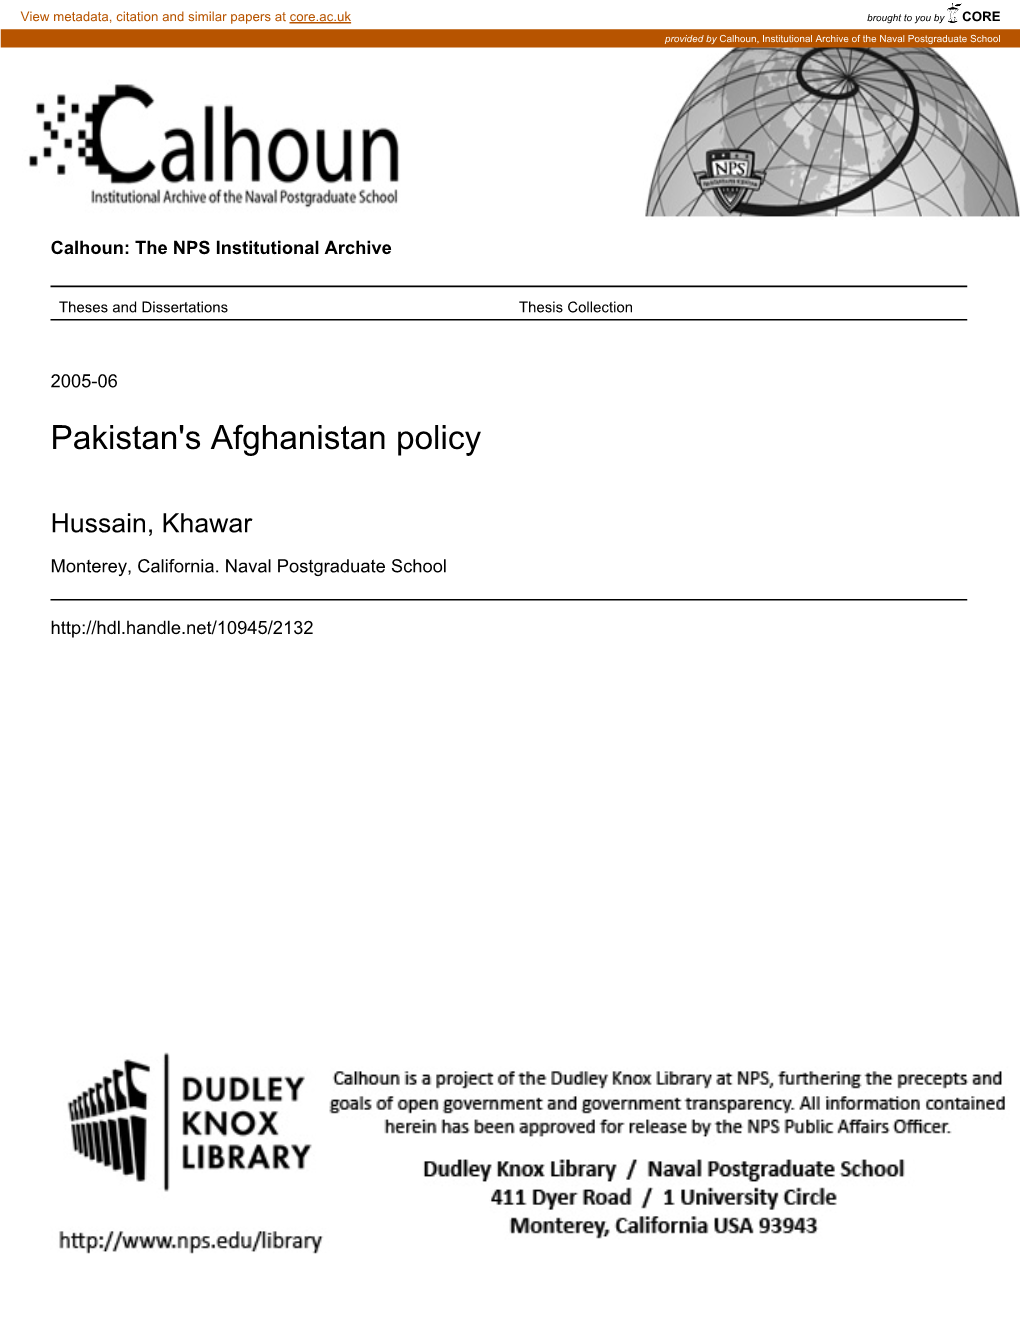 Pakistan's Afghanistan Policy